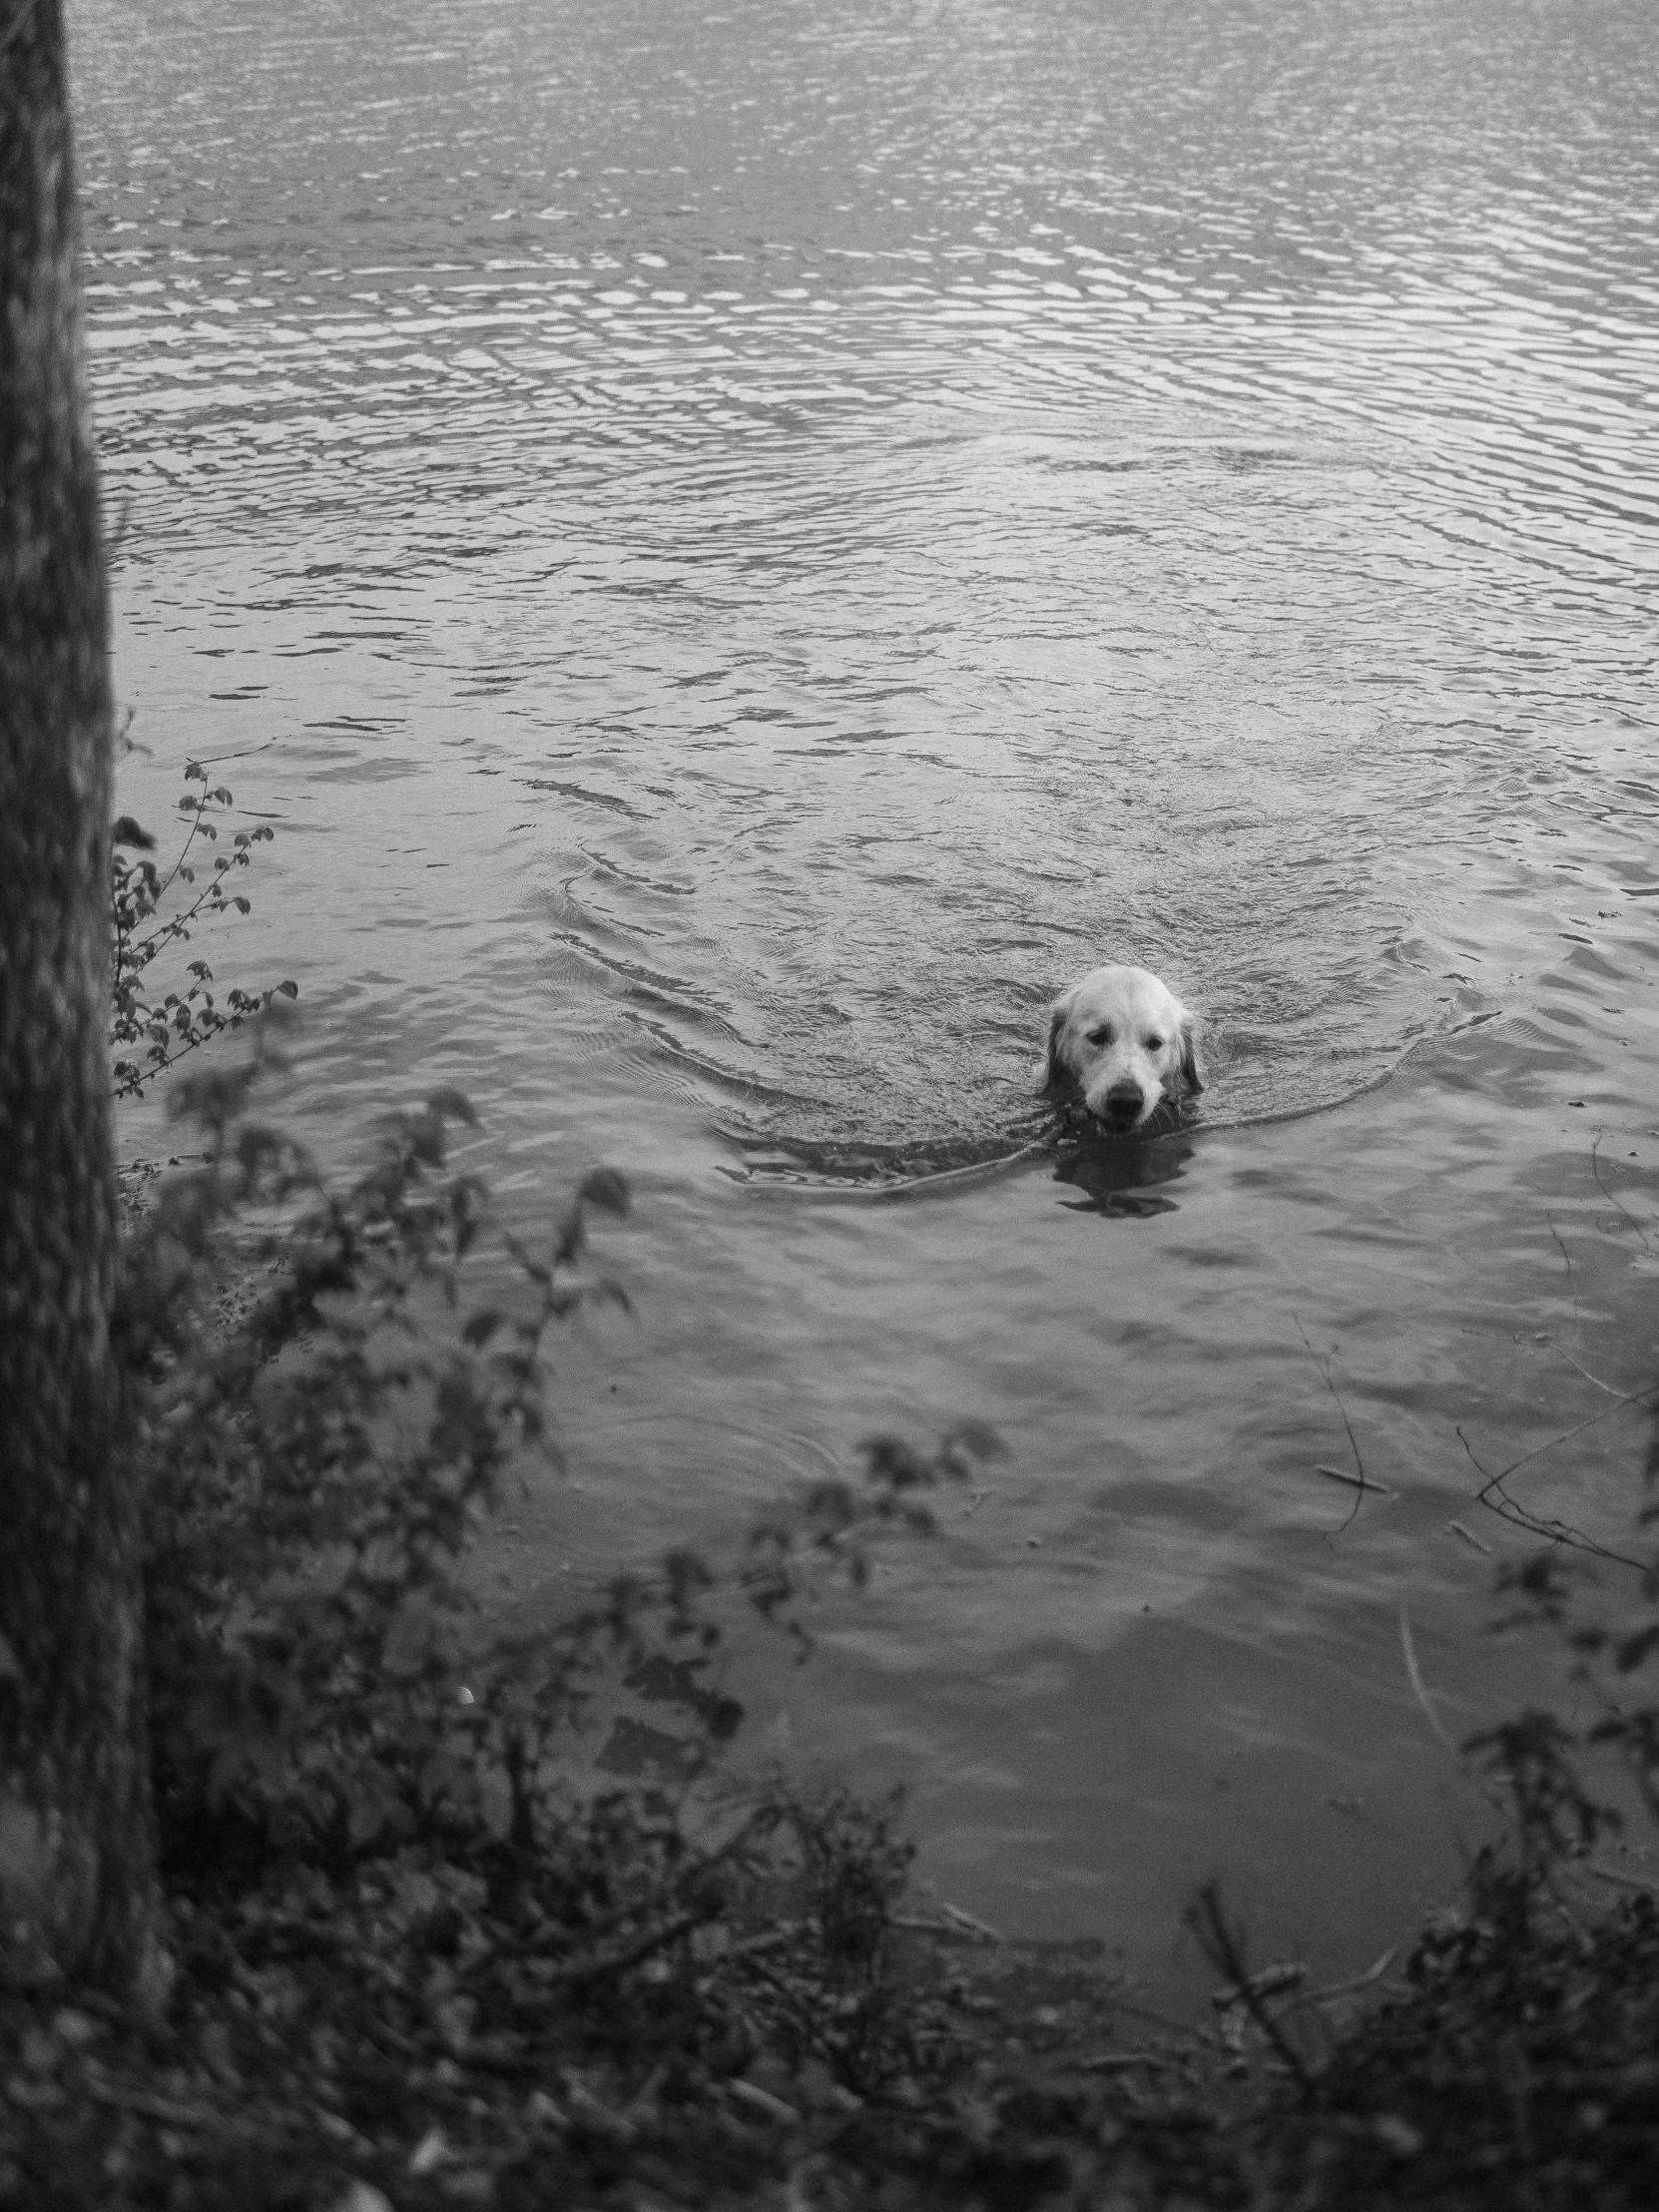 a dog swimming in water near trees